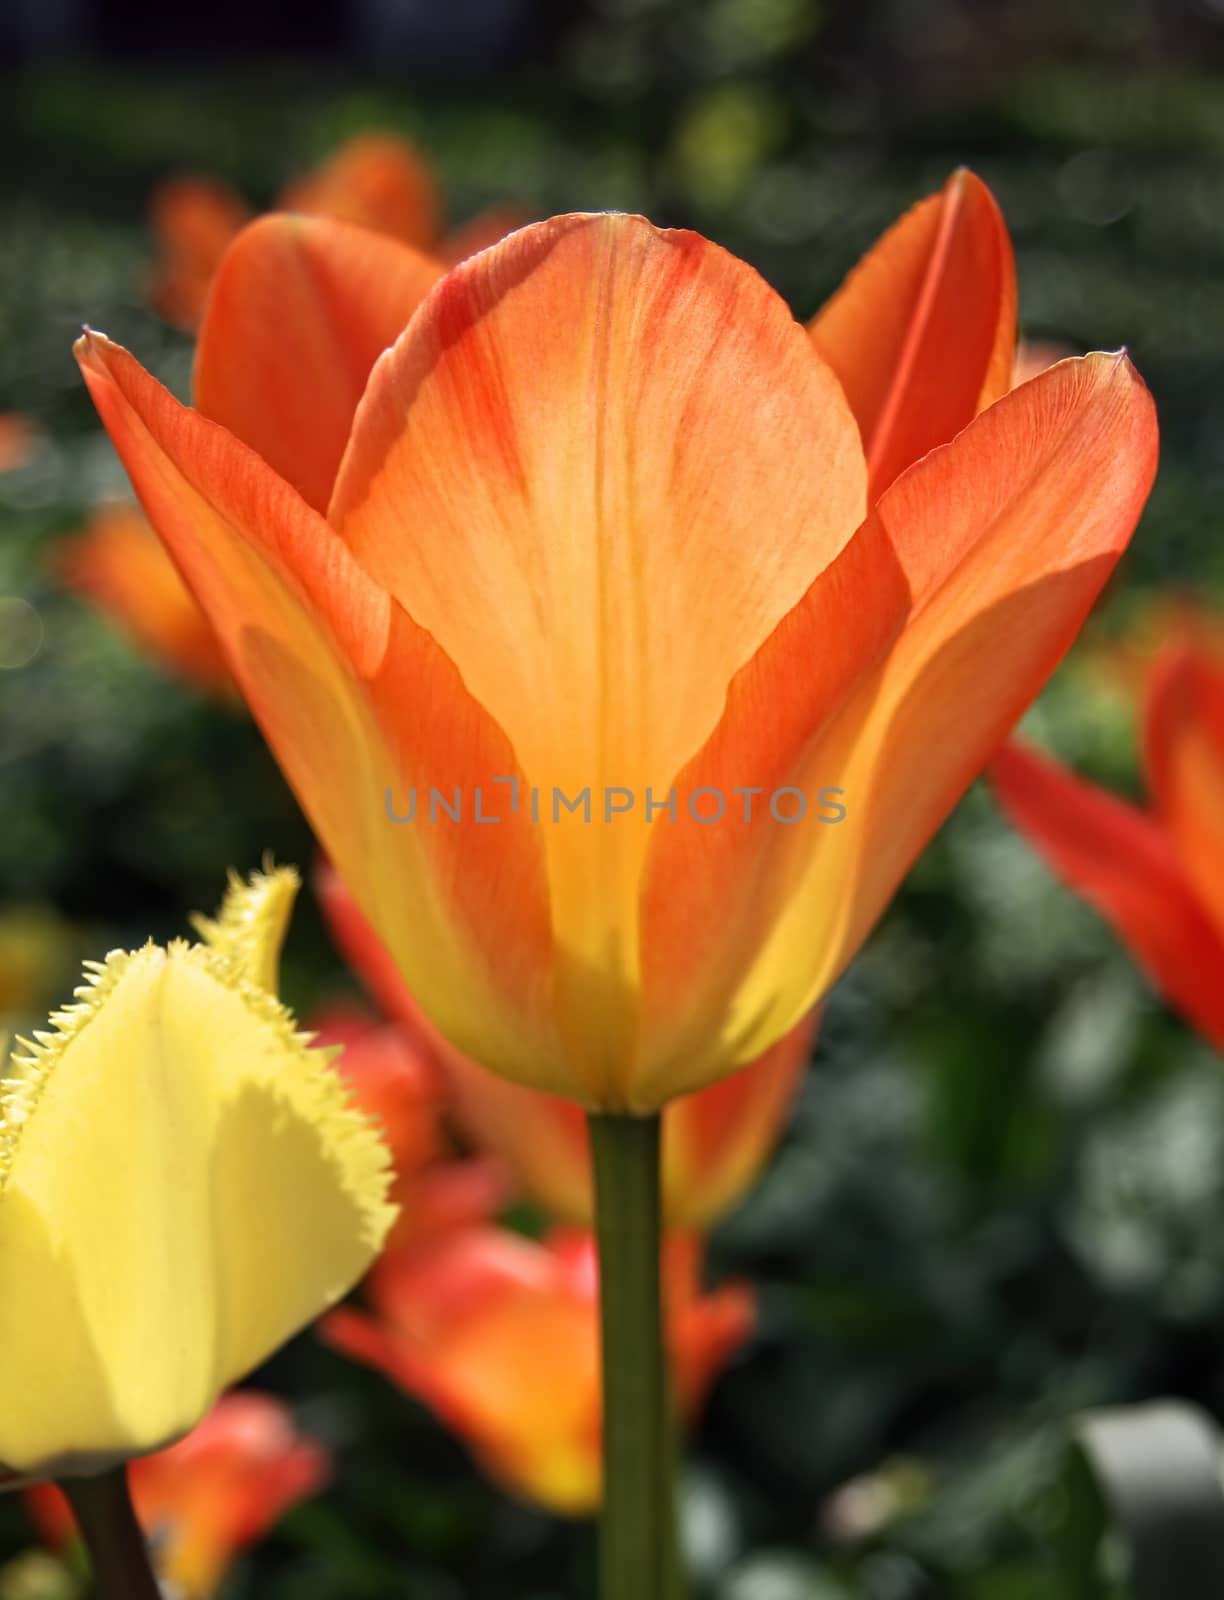 Beautiful orange tulips with green leaves. Spring flowers bloom in the garden. Natural floral background.